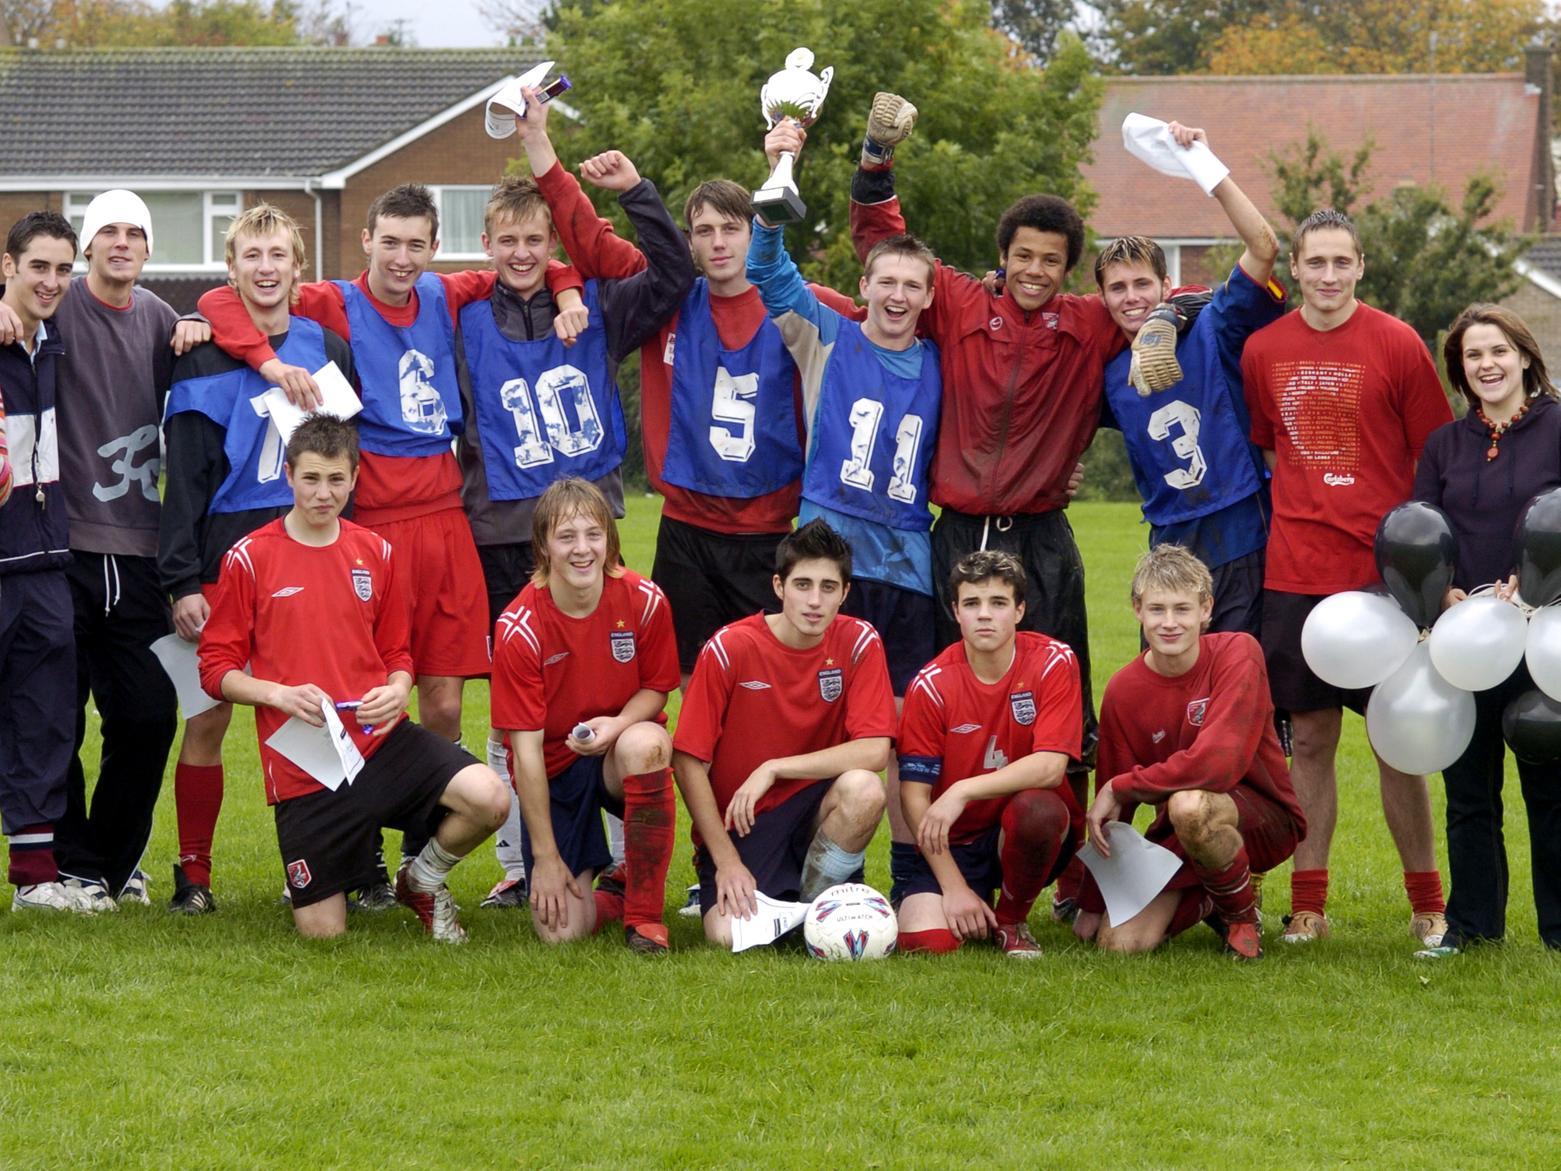 10 sports pictures from our archives / Email daniel.gregory@jpimedia.co.uk or Tweet @SN_Sport with any information